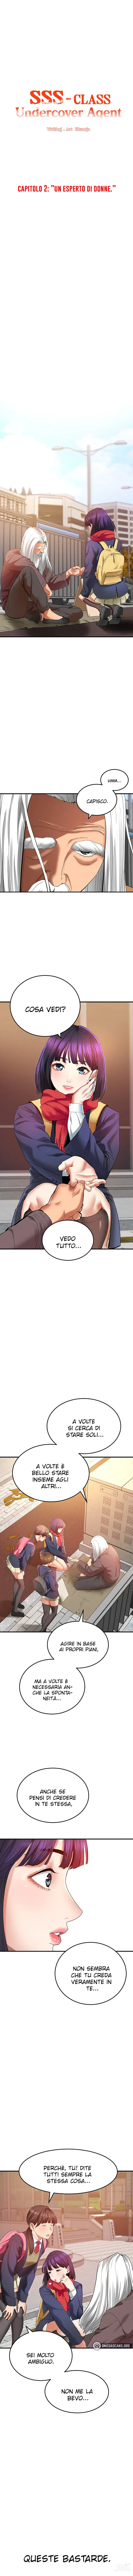 Page 4 of manga SSS-Class Undercover Agent Capitolo 02